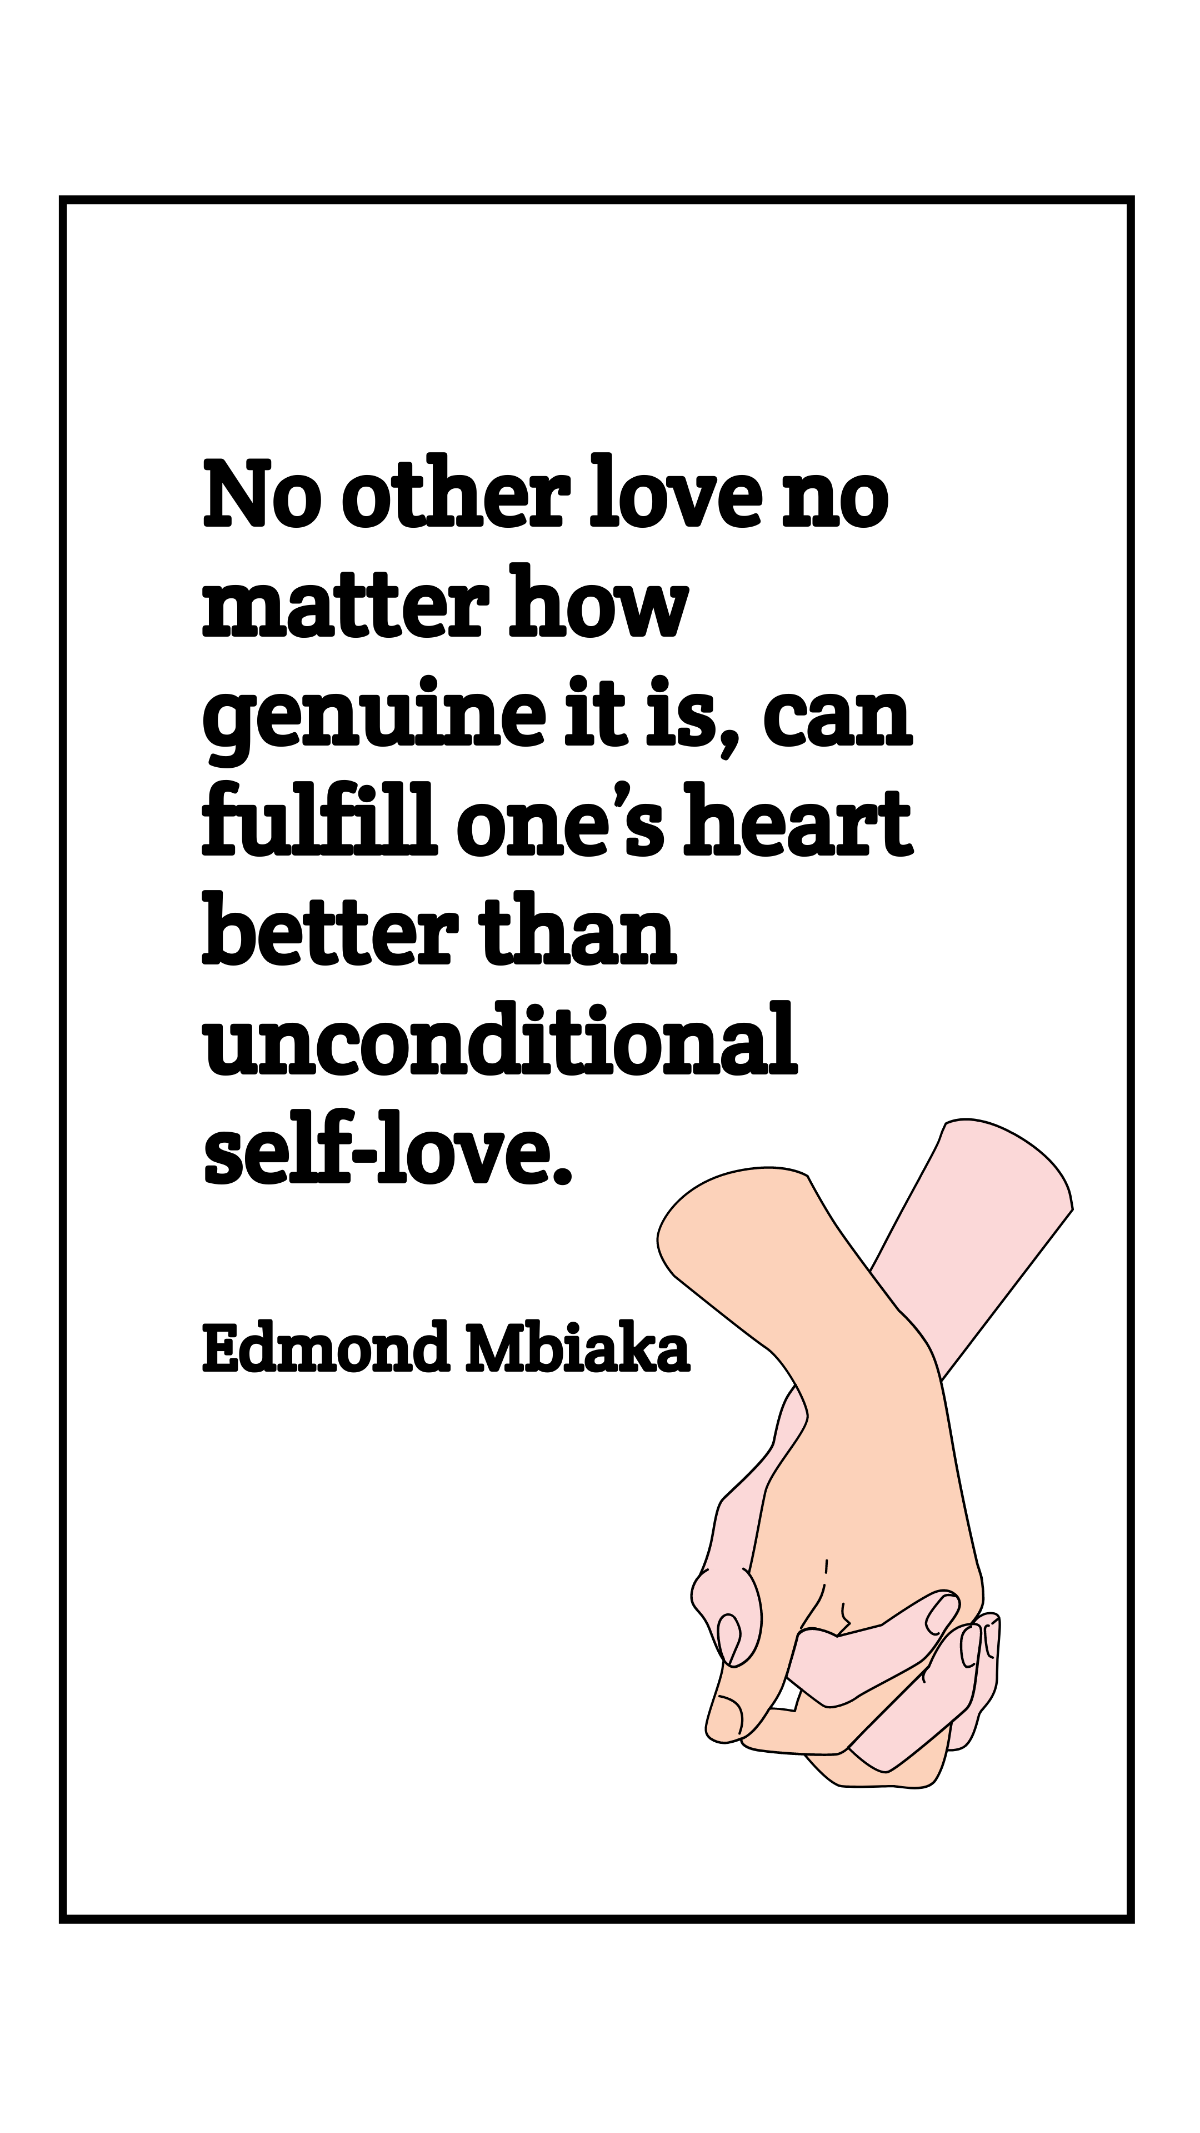 Free Edmond Mbiaka - No other love no matter how genuine it is, can fulfill one’s heart better than unconditional self-love. Template